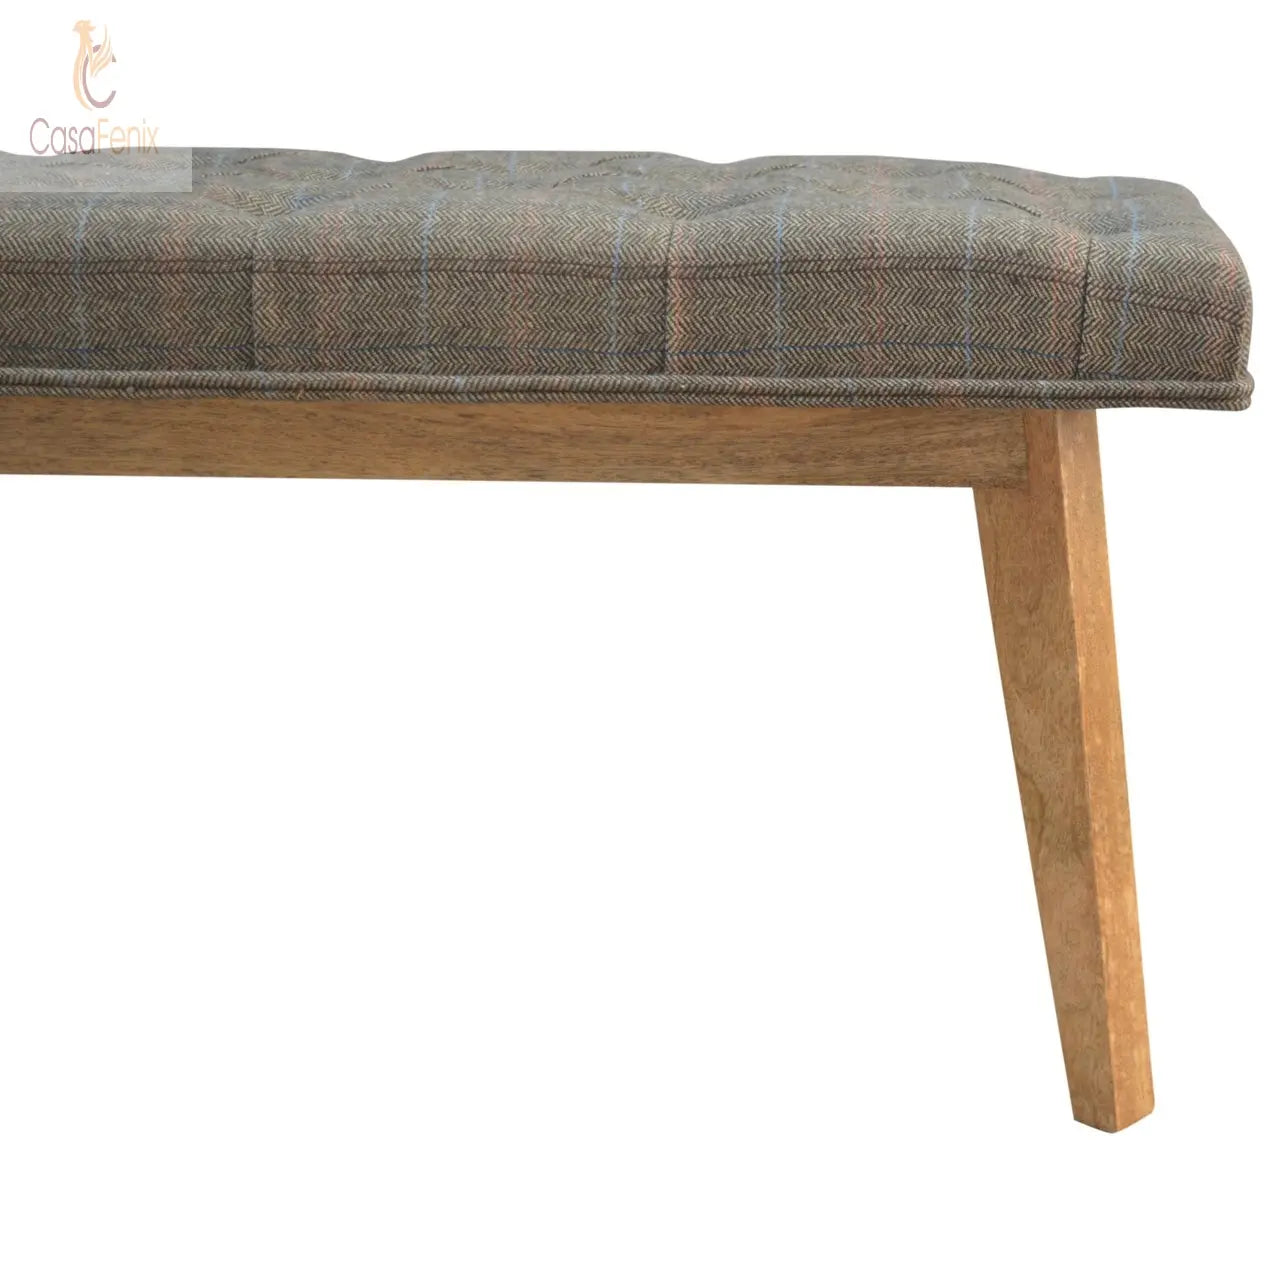 Multi Tweed Deep Button Bedroom Bench 100% solid mango wood, and upholstered in multi tweed - CasaFenix